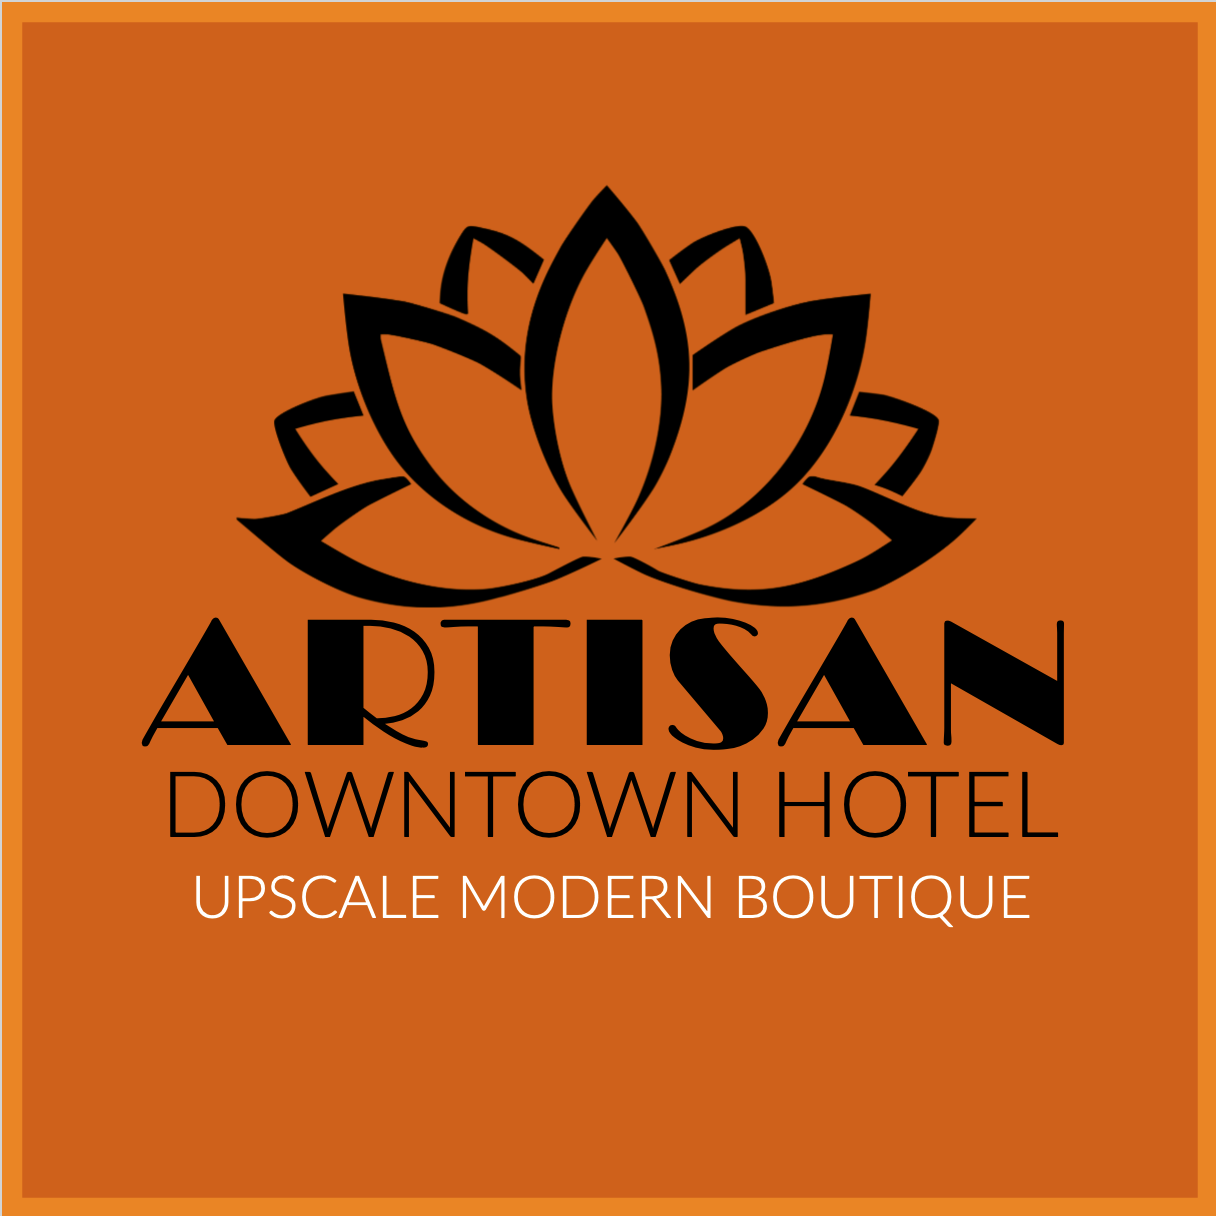 The Historic ARTISAN Downtown Hotel